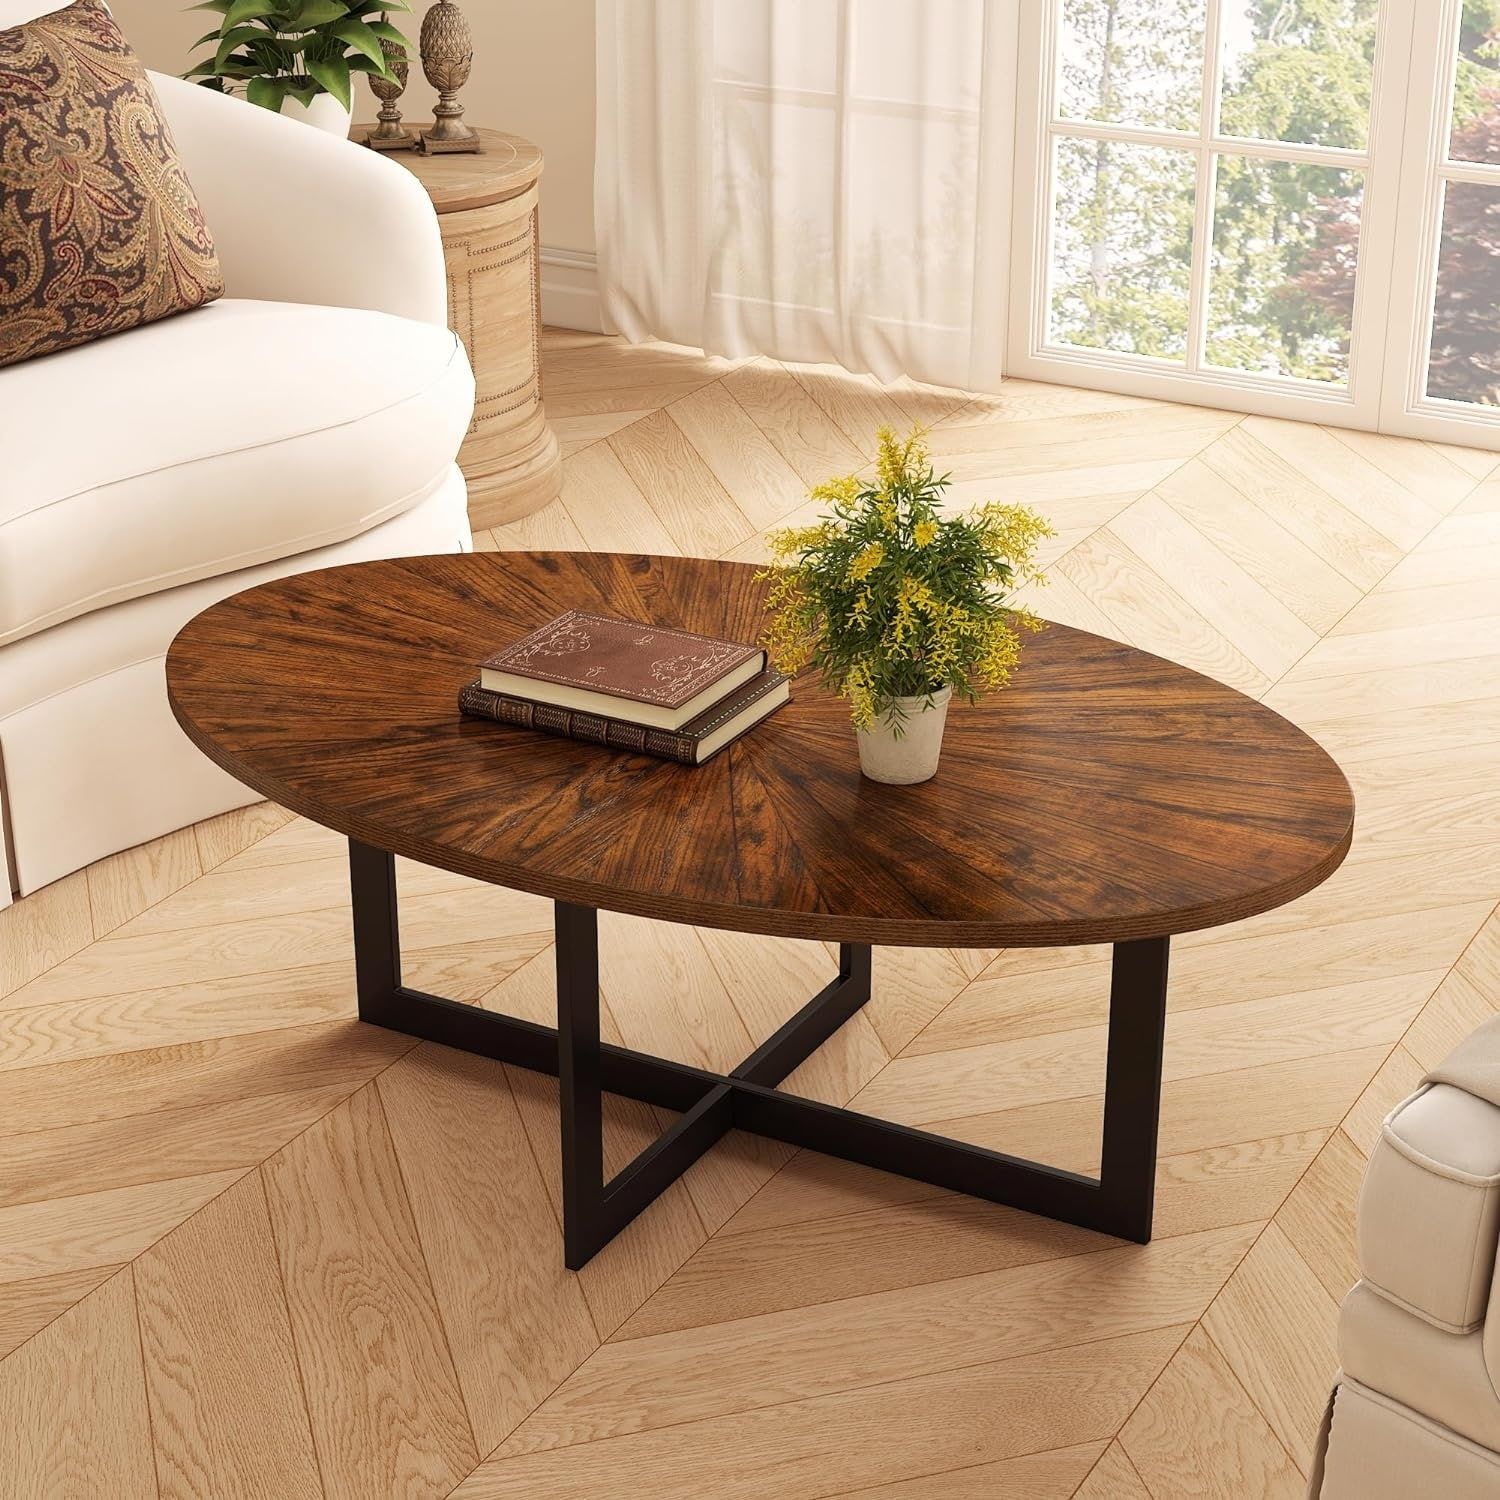 Solid Wood Contemporary Oval Coffee Table With Cross Metal Legs – On Sale –  Bed Bath & Beyond – 36581884 Regarding Coffee Tables With Solid Legs (View 8 of 15)